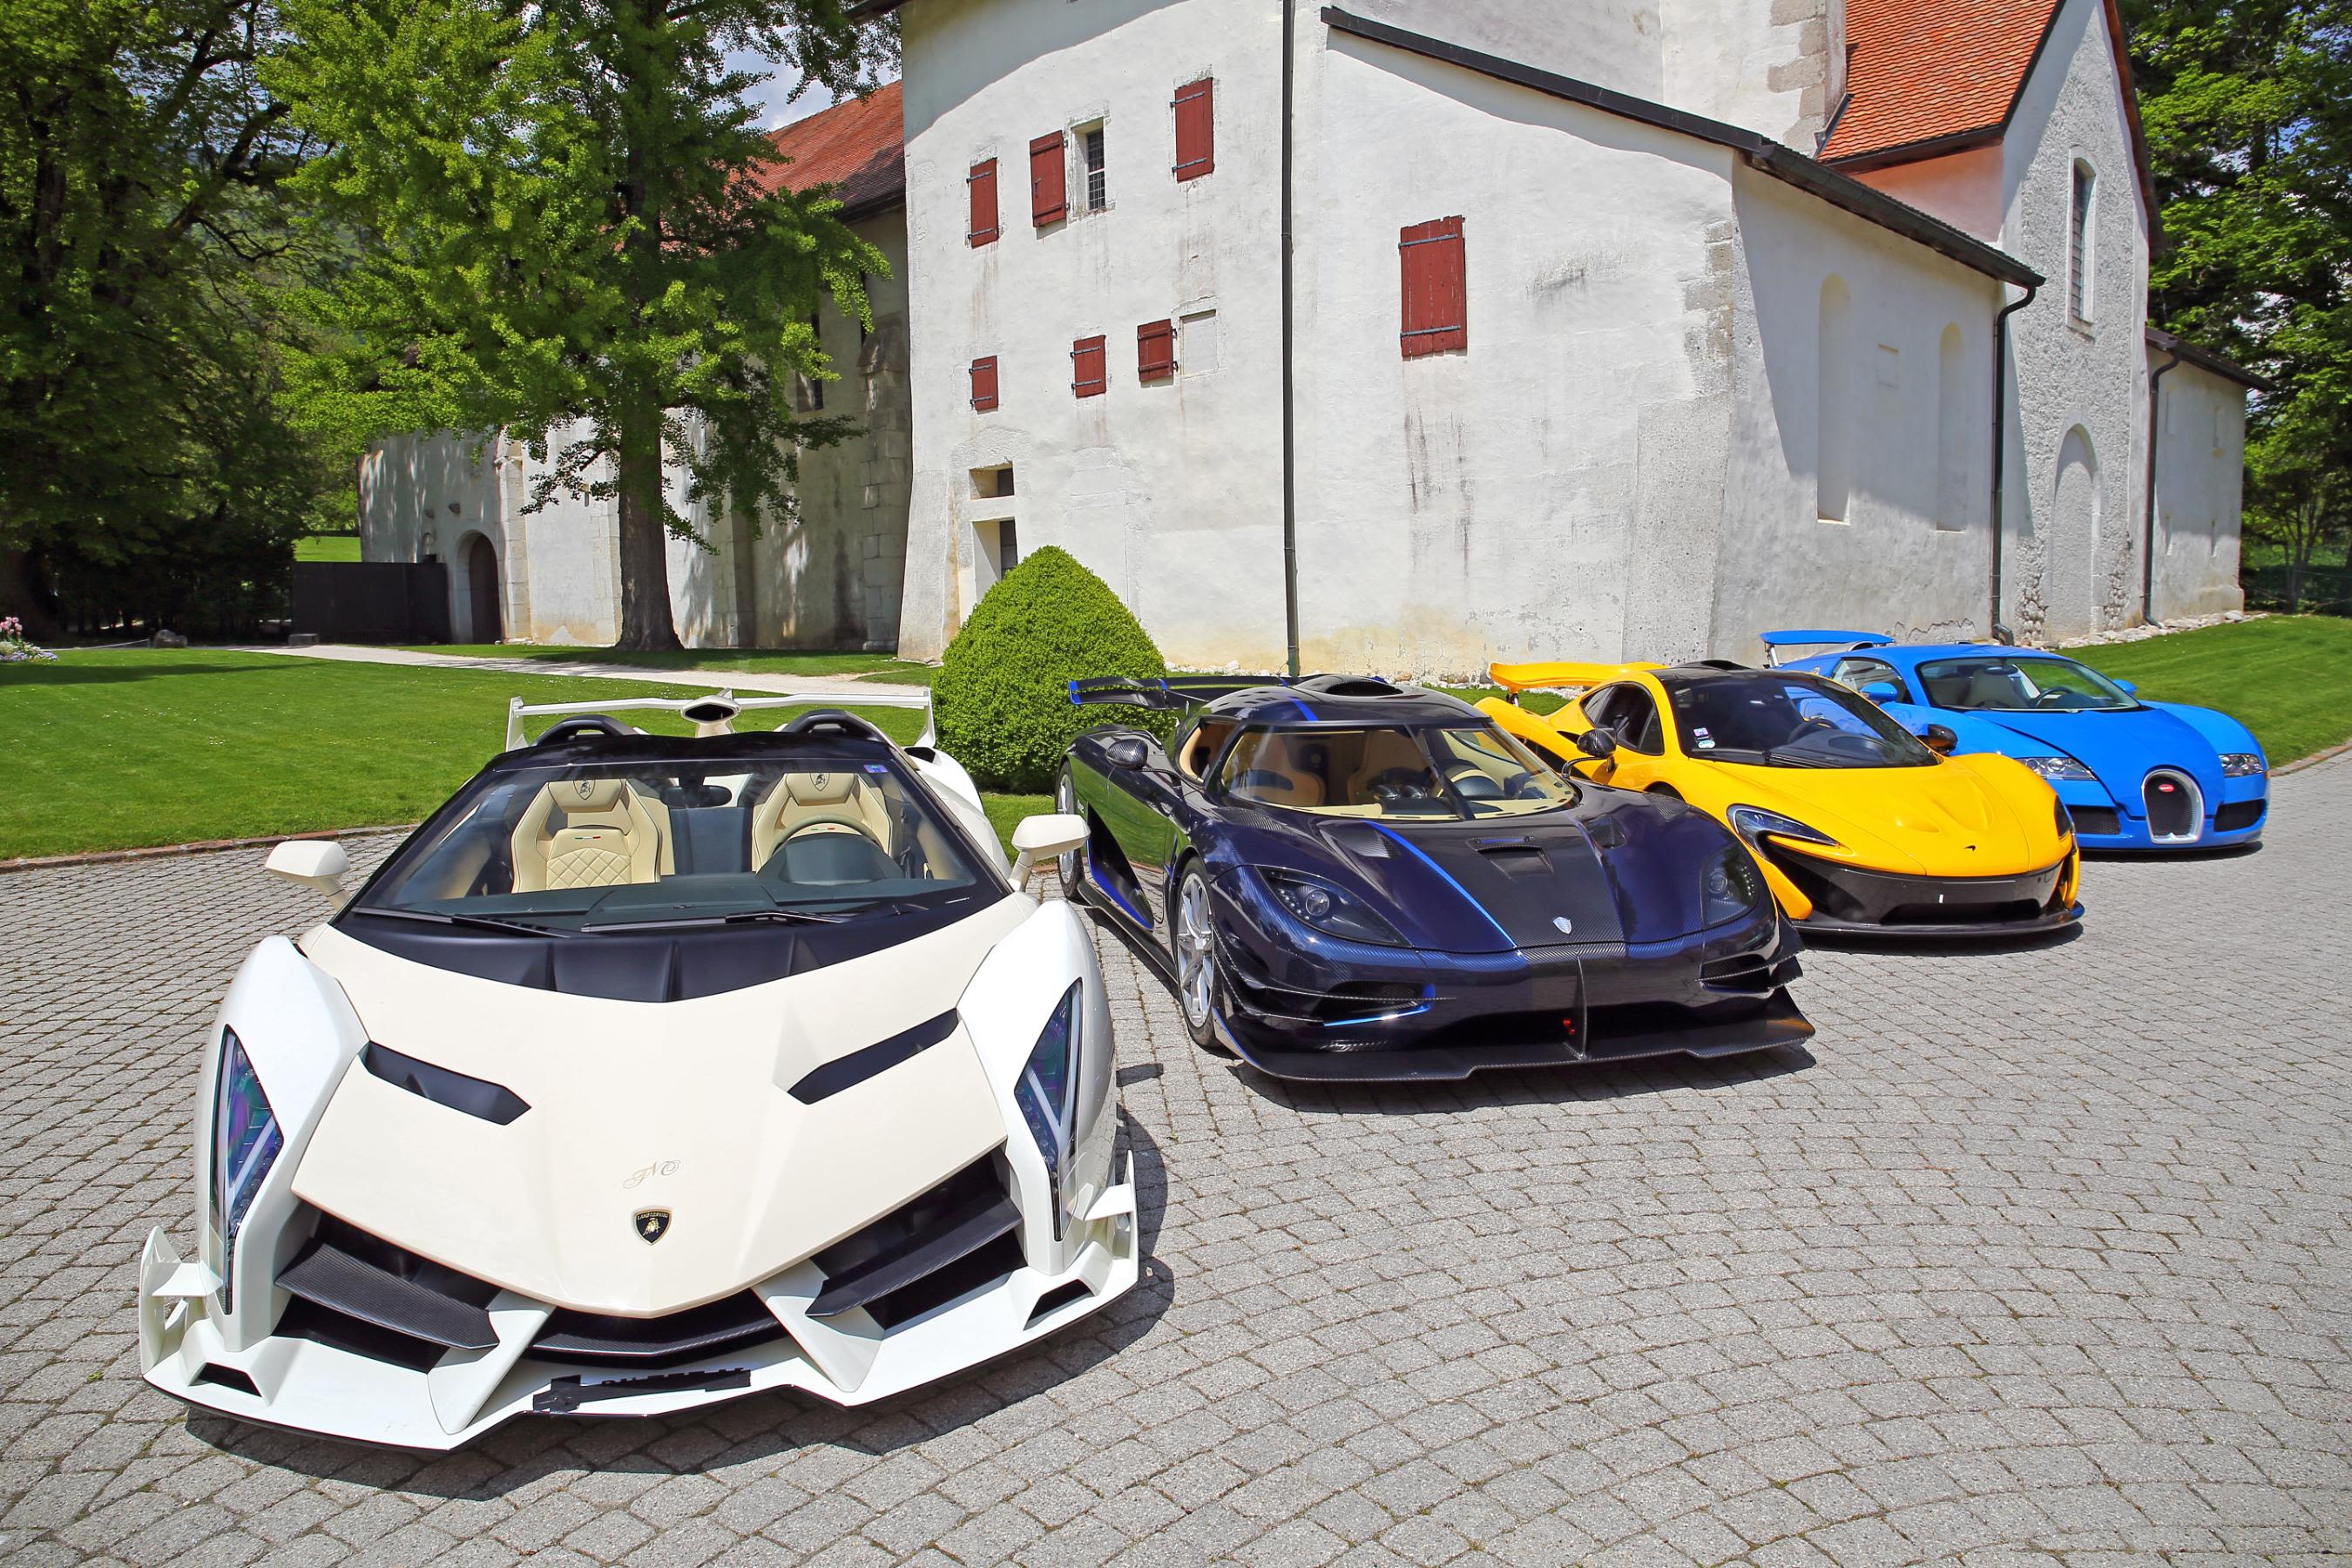 Alleged drug trafficker's seized sports car collection up for auction